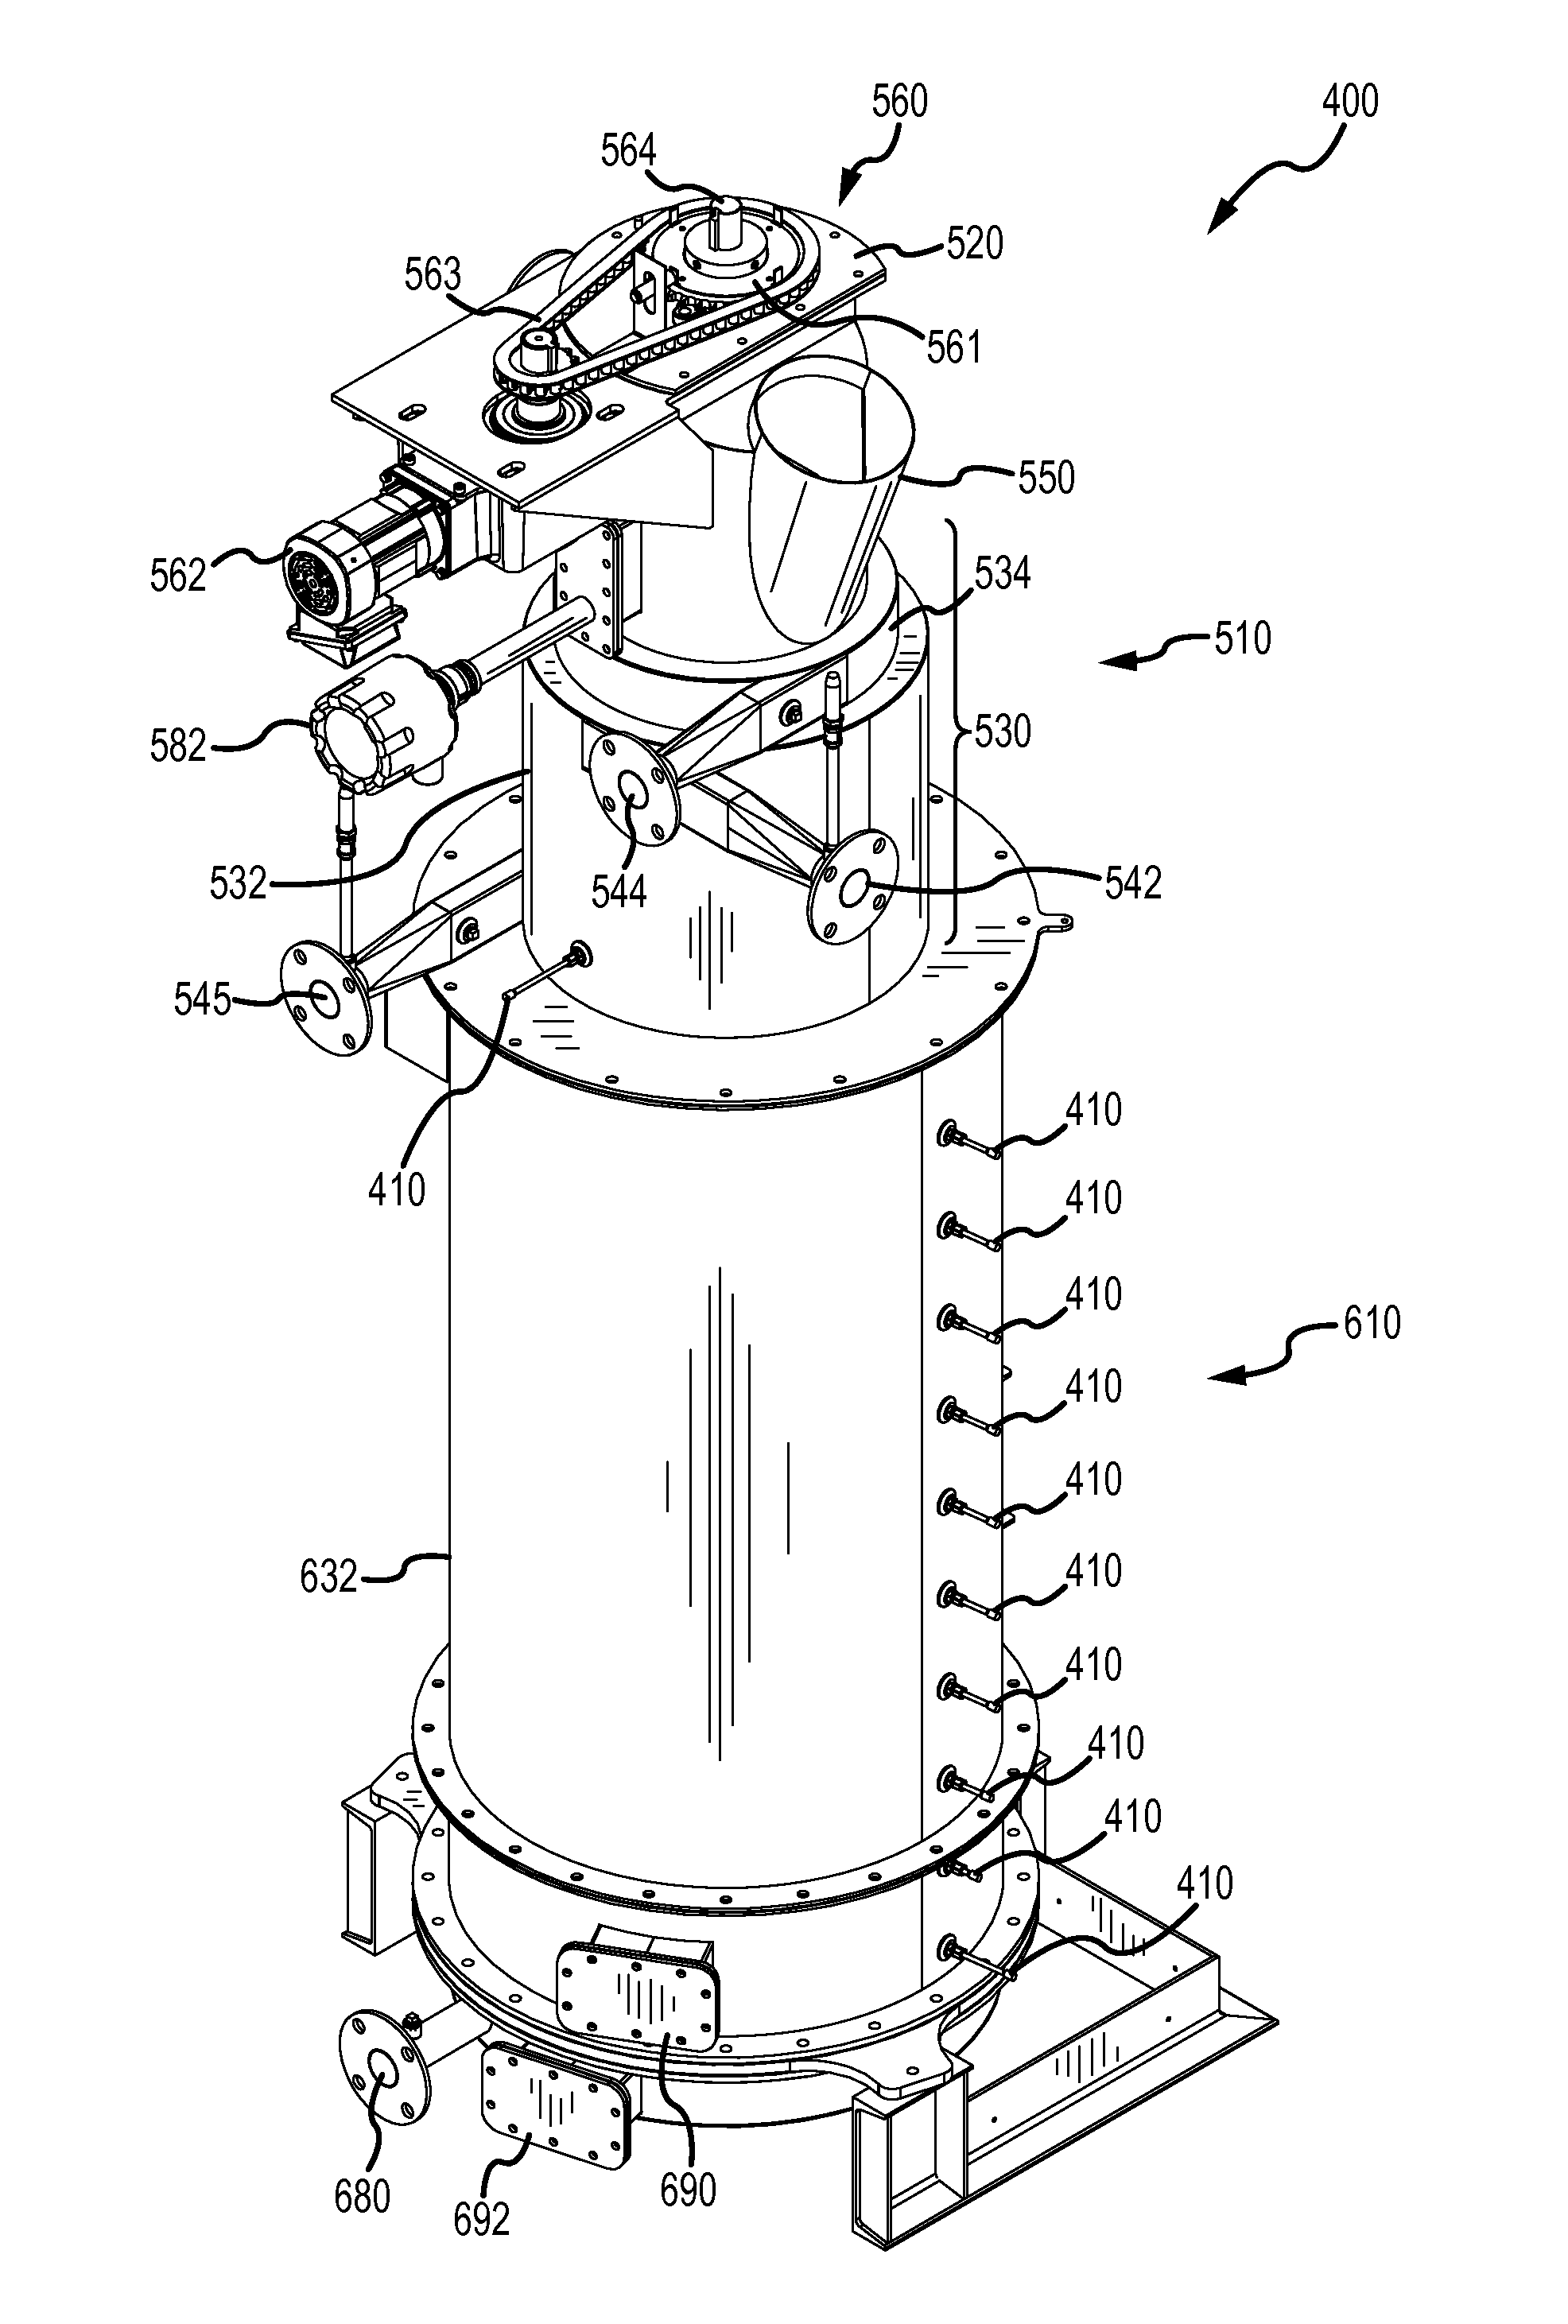 Apparatuses, systems, mobile gasification systems, and methods for gasifying residual biomass